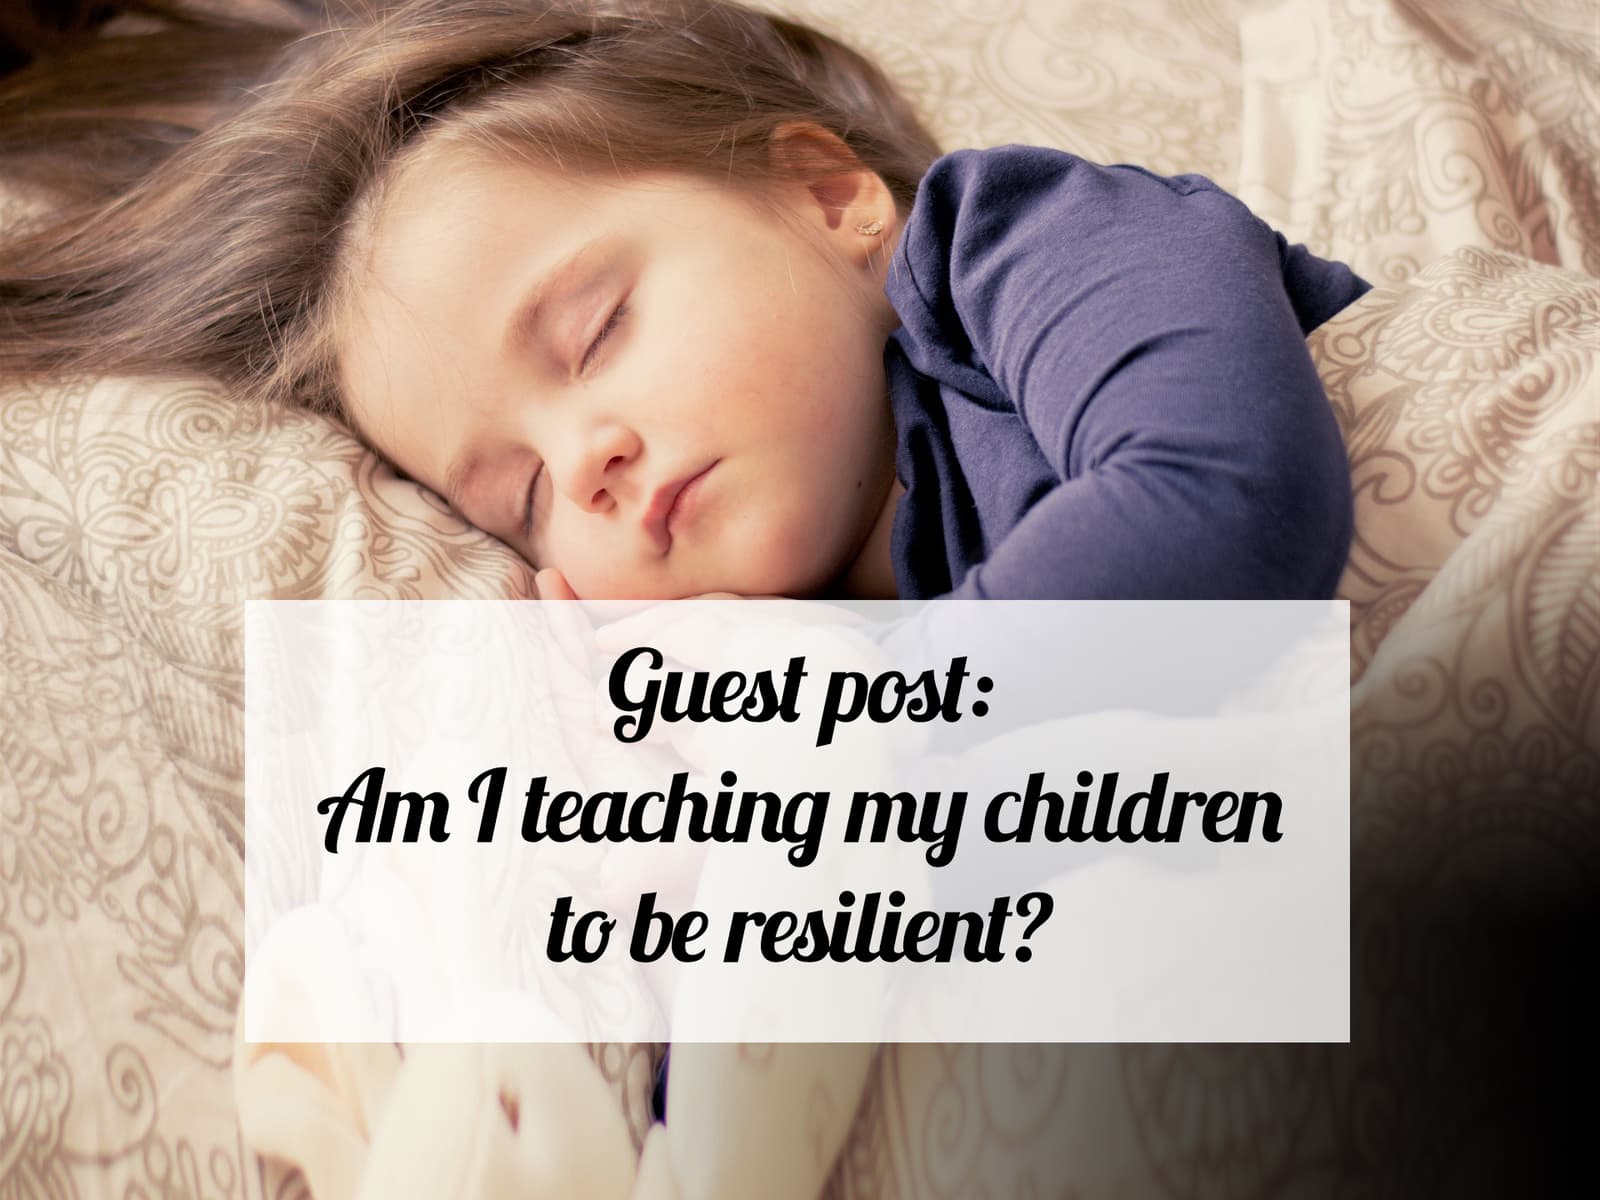 Guest post: Am I teaching my children to be resilient?